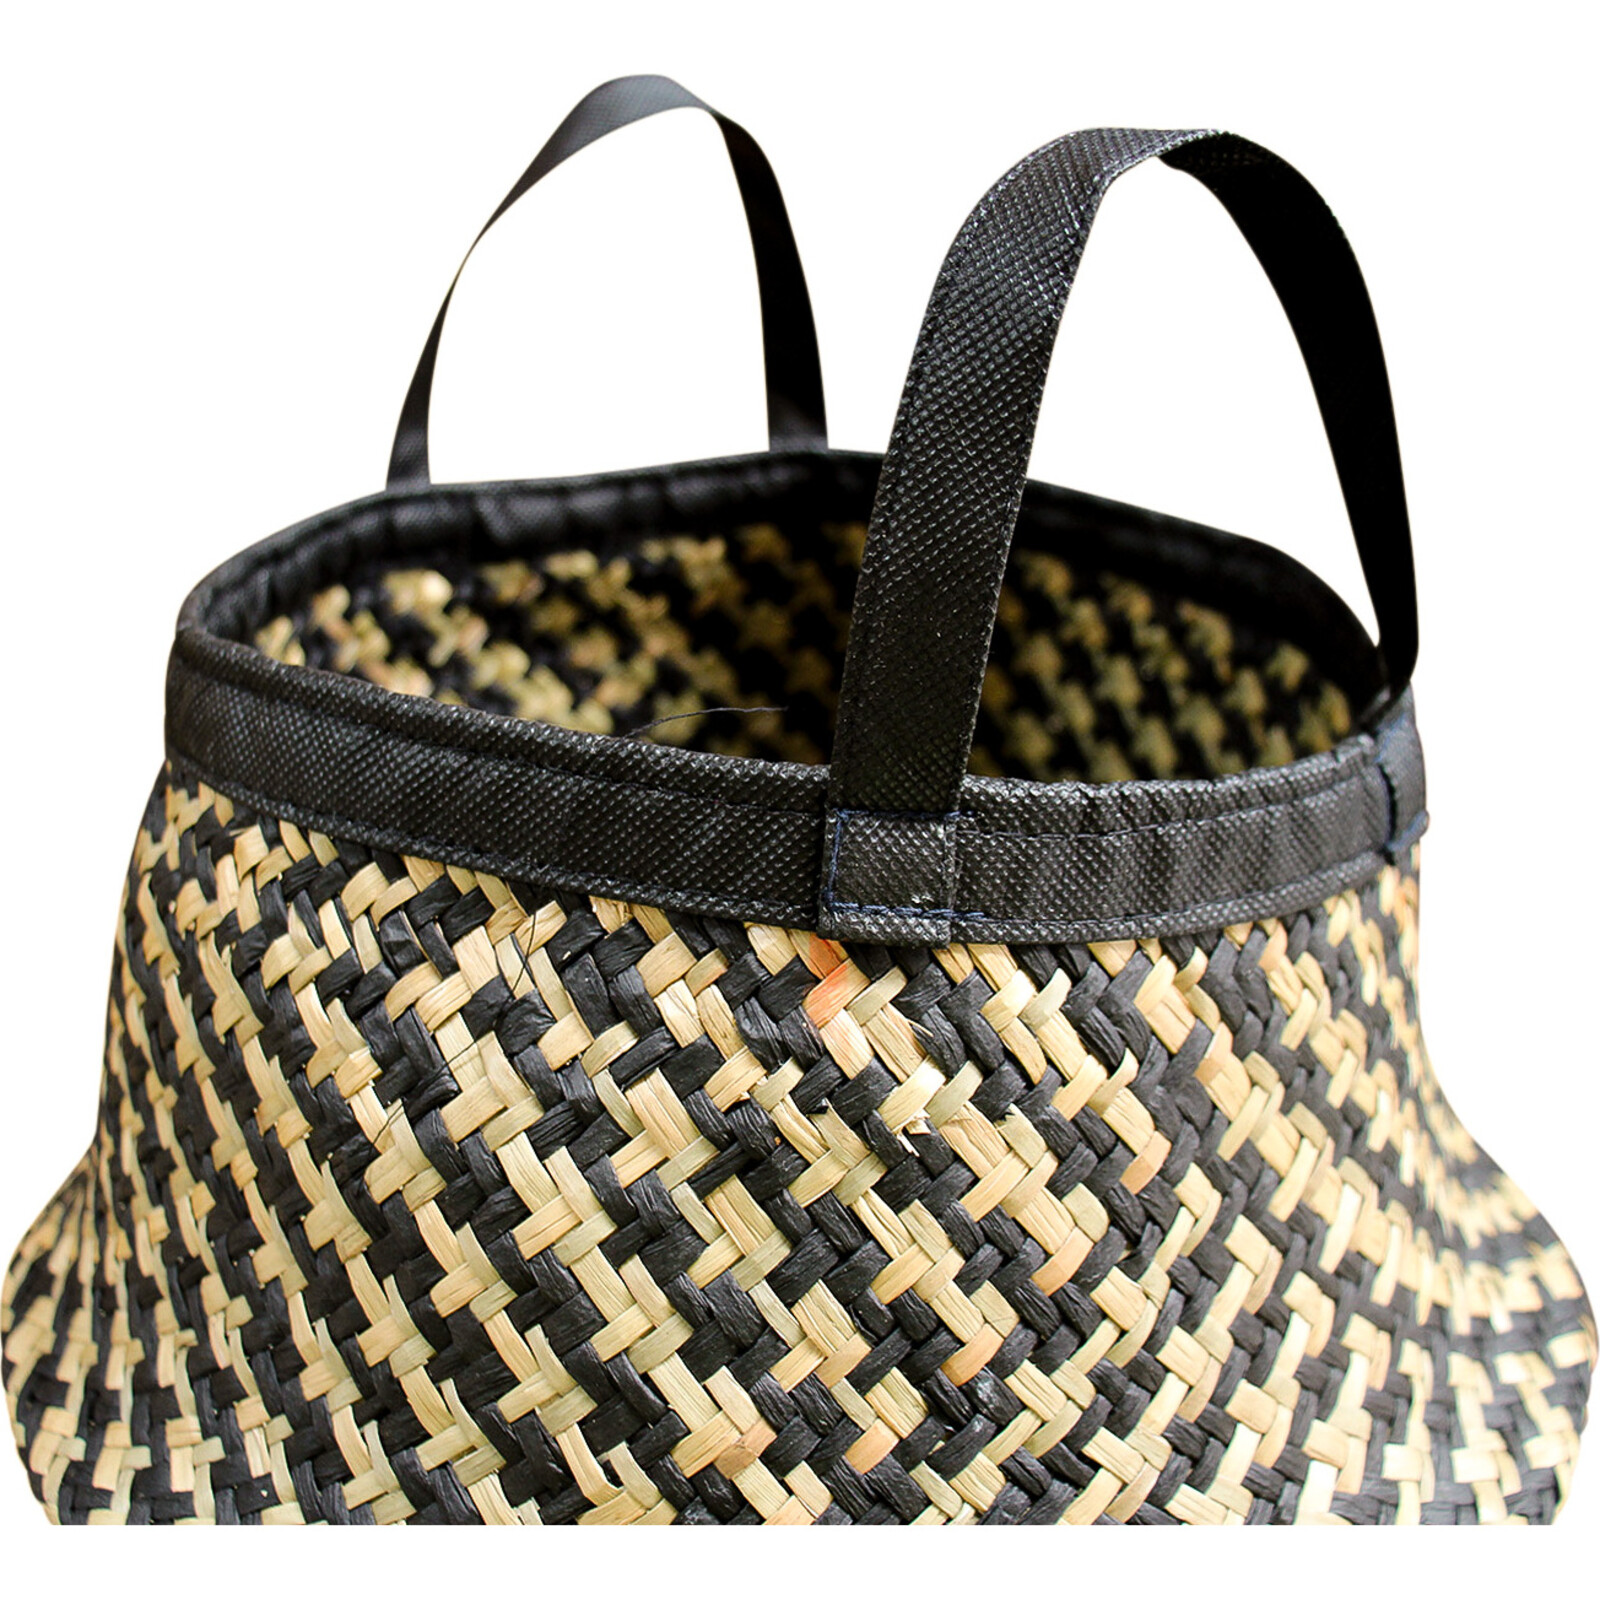 Belly Basket Two Tone Black S/2